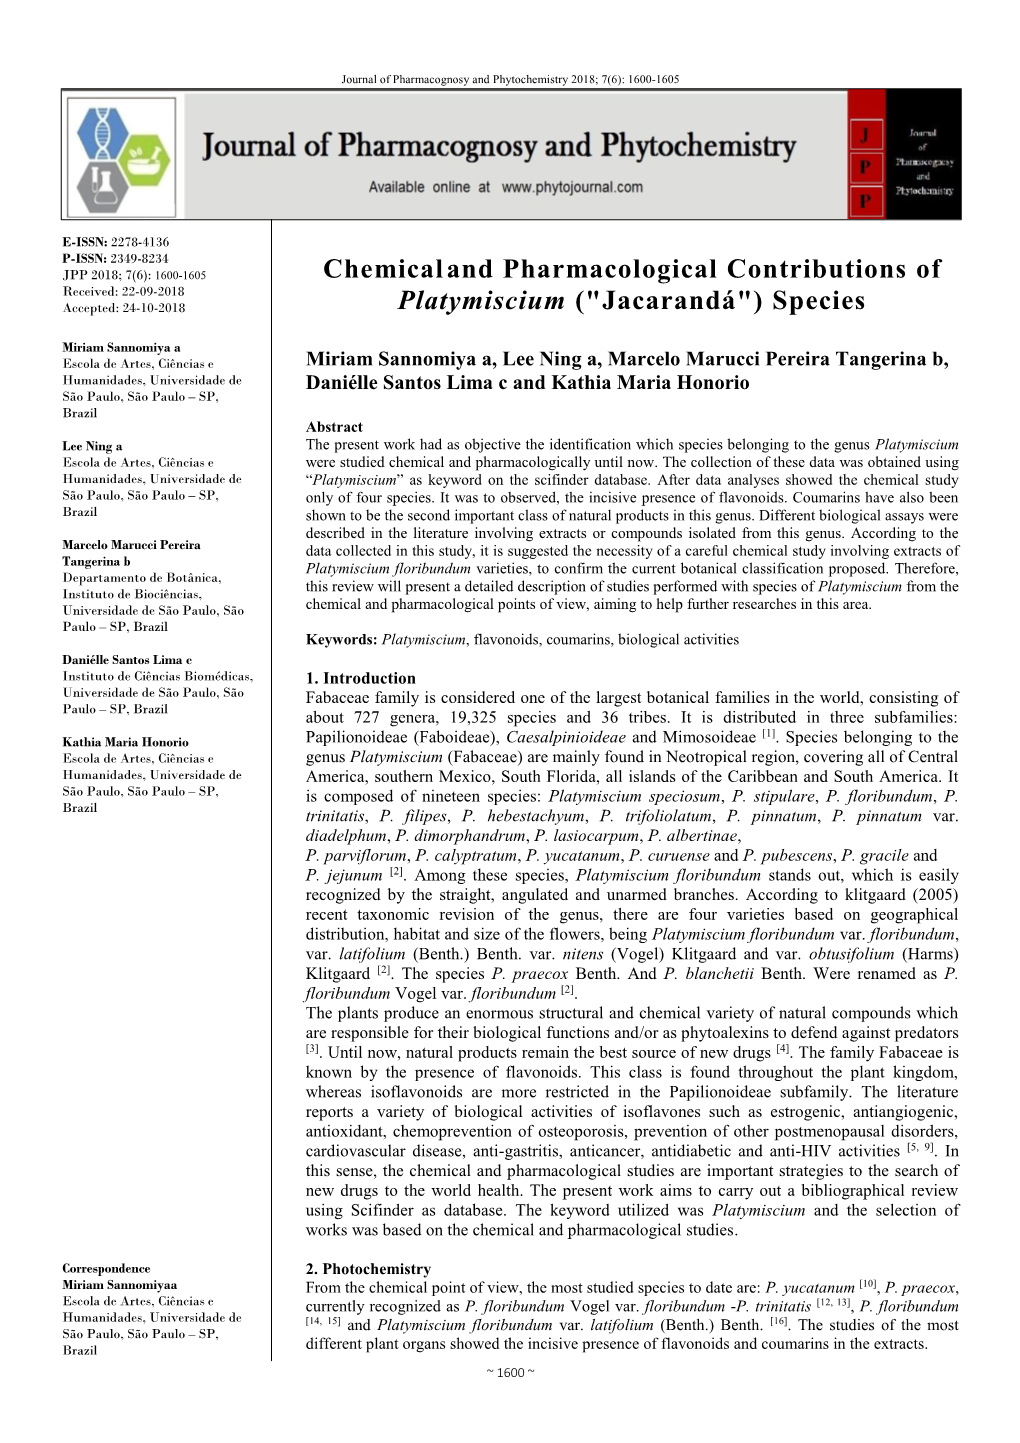 Chemical and Pharmacological Contributions of Platymiscium